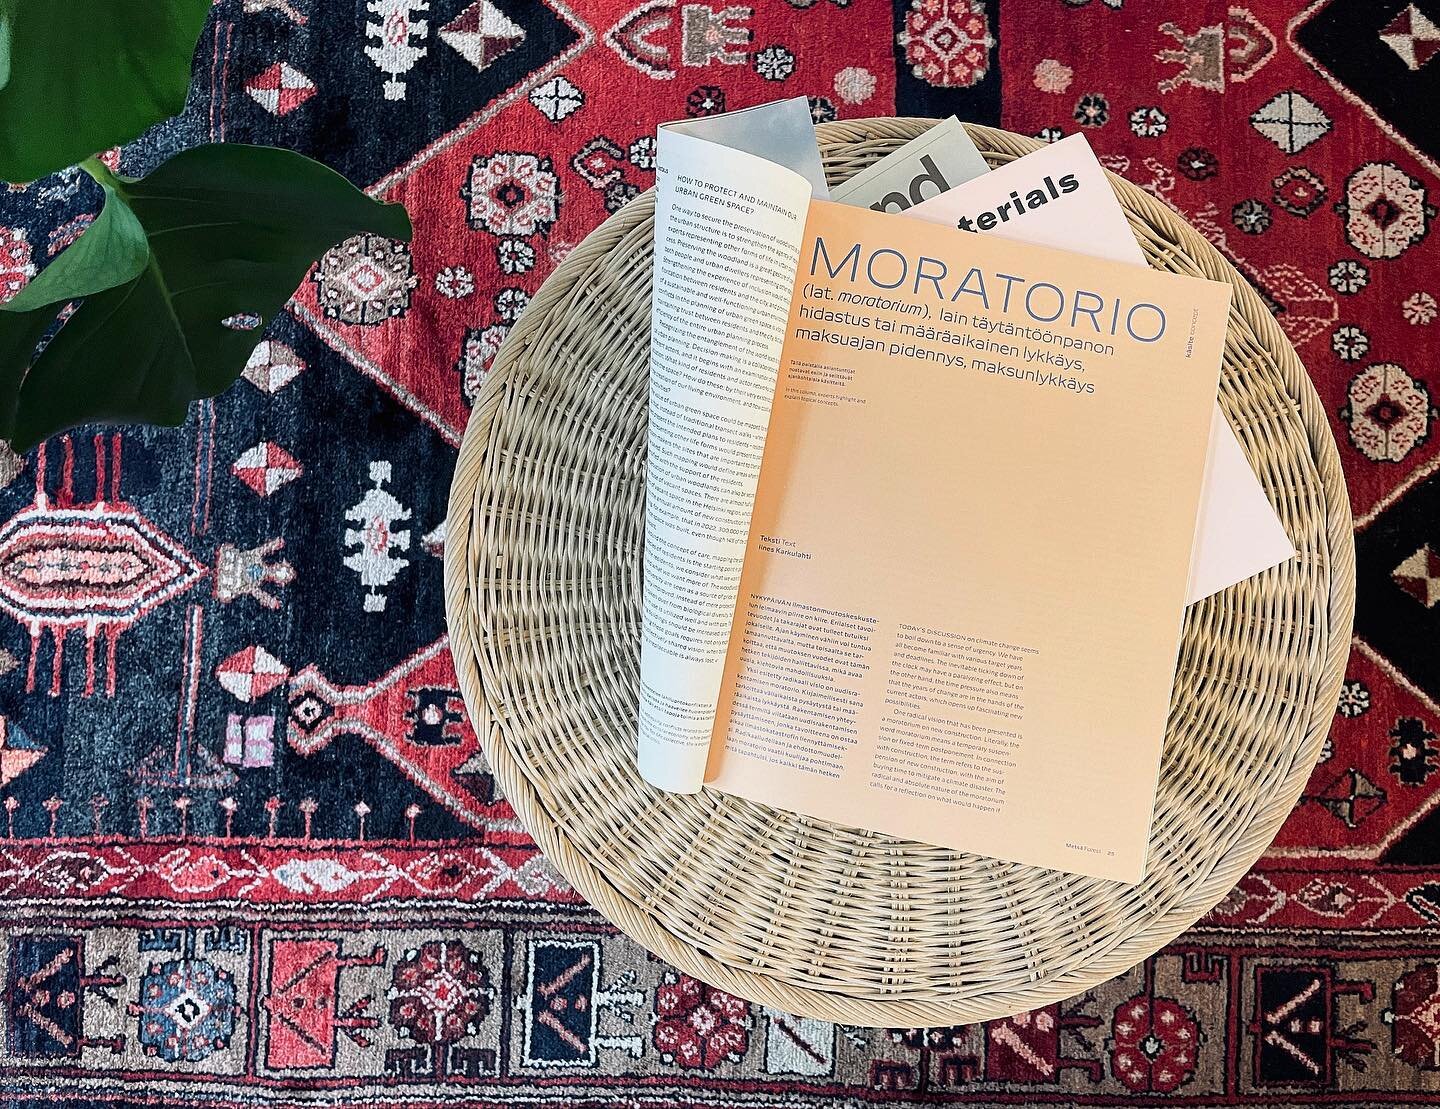 Read about &rdquo;moratorium&rdquo; by @iineskarkulahti in the latest issue of @ark_review 📜

&ldquo;Today&rsquo;s discussion on climate change seems to boil down to a sense of urgency. We have all become familiar with various target years and deadl